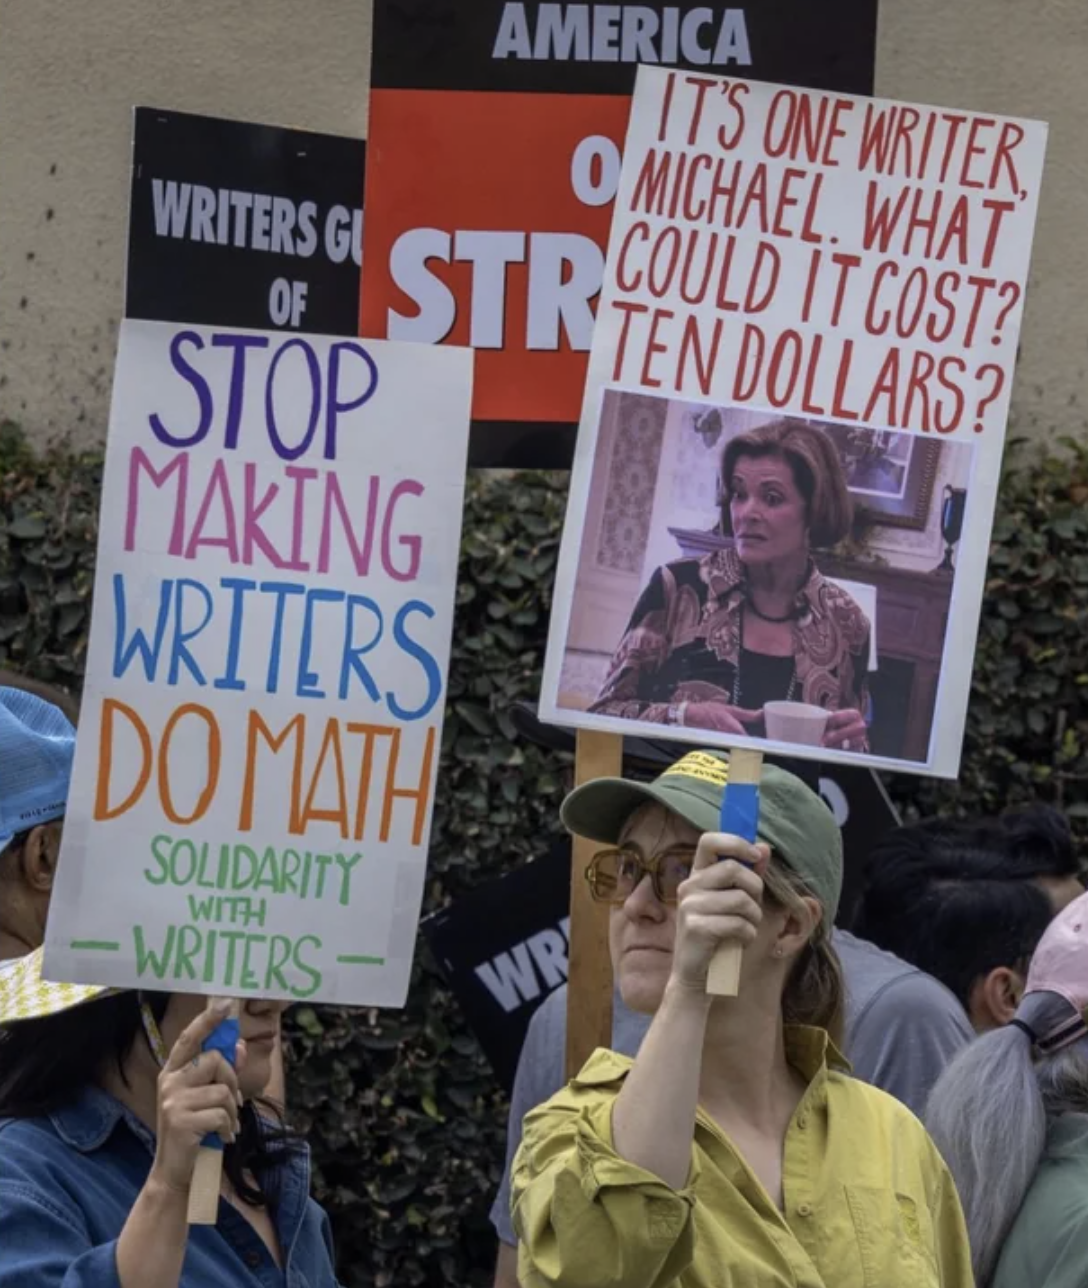 fascinating photos - writers strike arrested development - It'S One Writer Omichael What Could It Cost? Writers G Strten Dollars? Of Stop Making Writers Do Math Solidarity With Writers America Wr